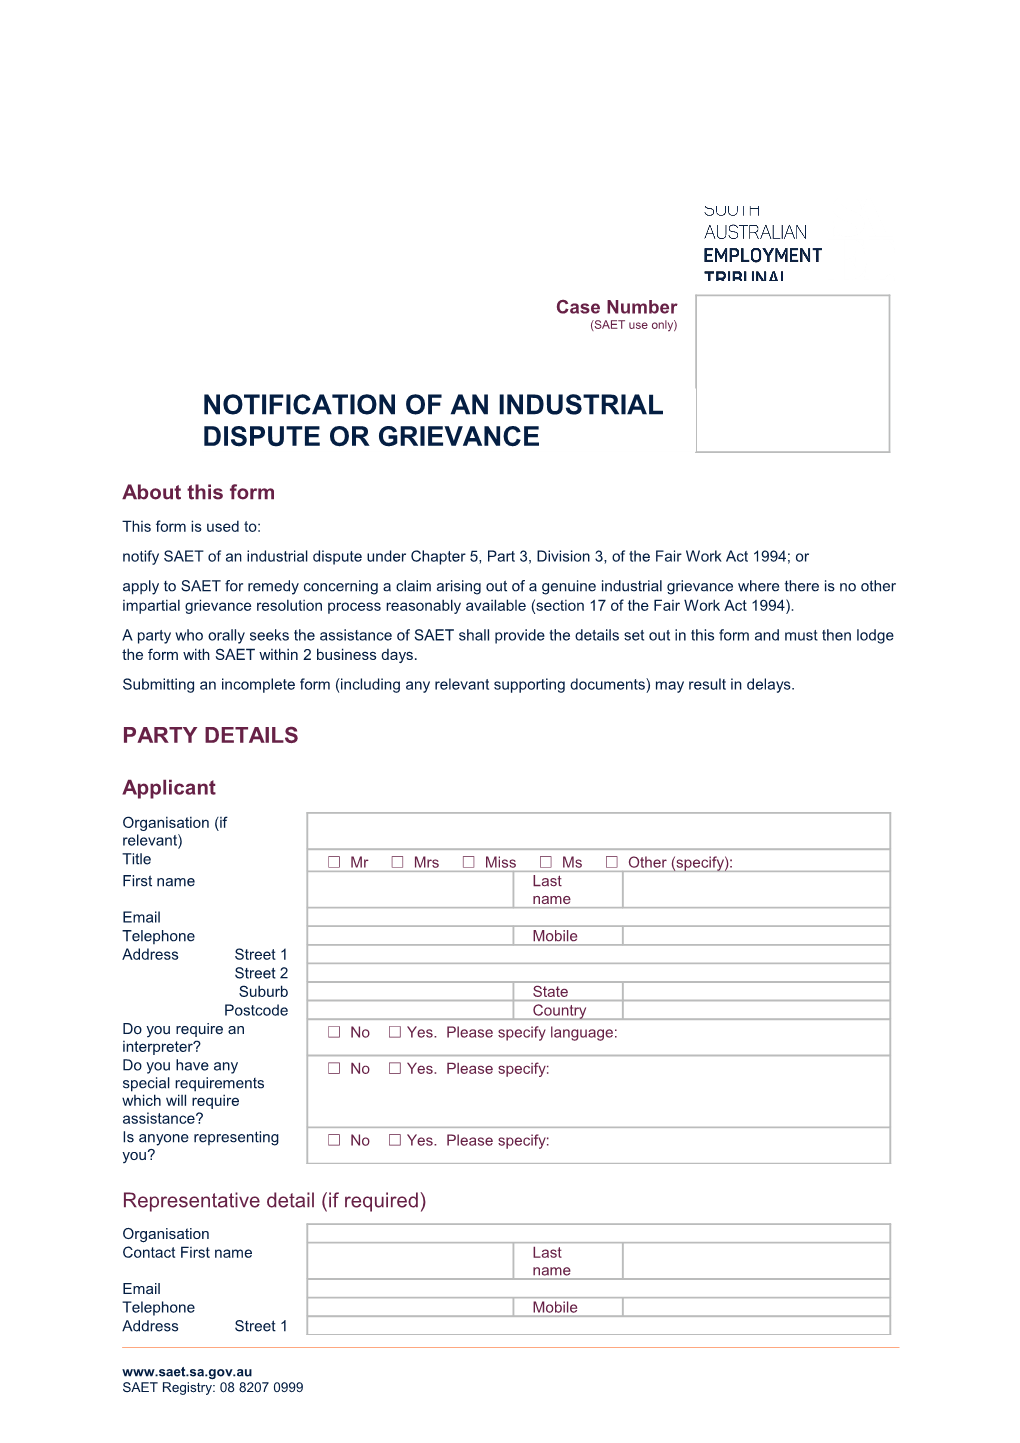 Notification of an Industrial Dispute Or Grievance